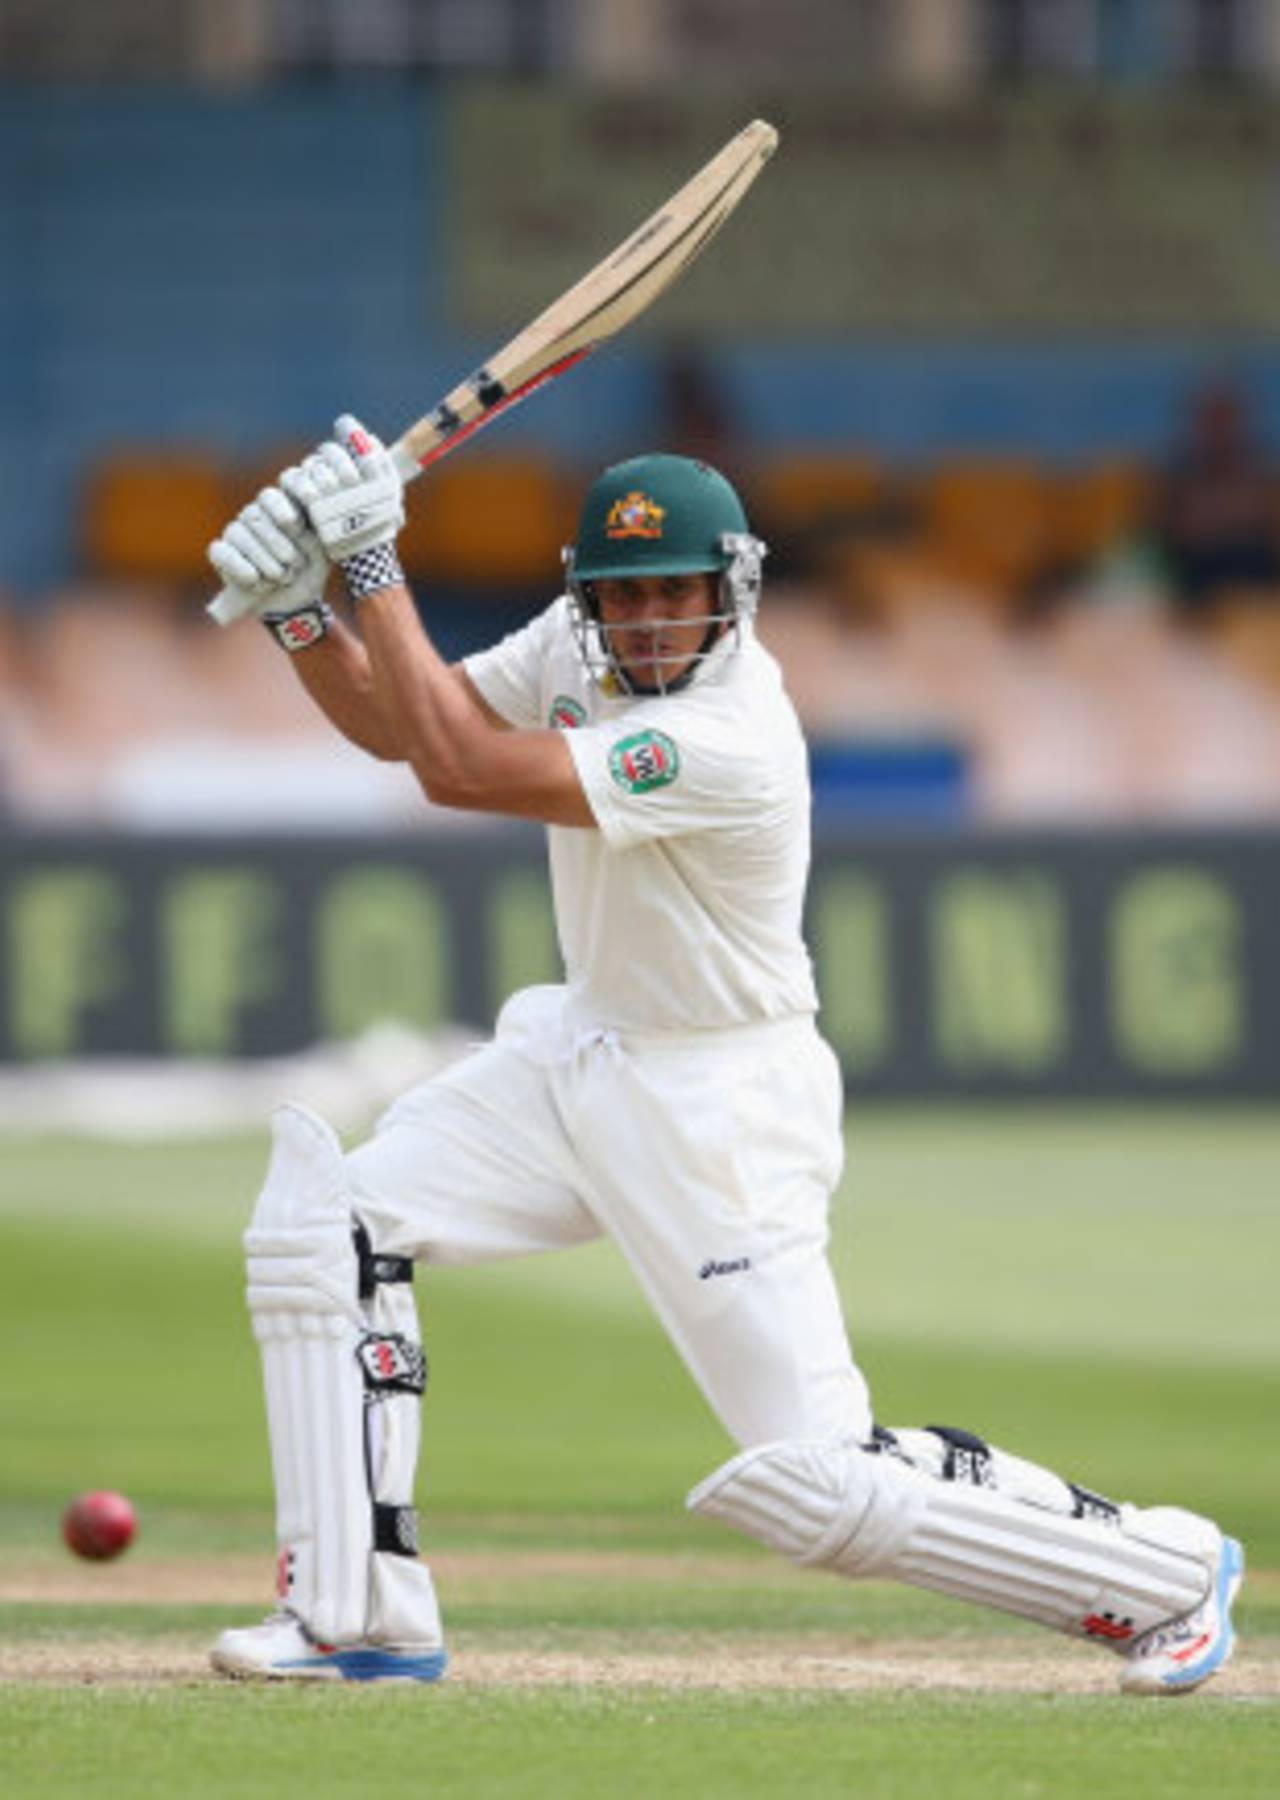 Uncertainty within the batting line-up and Khawaja's sound preparations with Australia A are pushing the batsman closer to a place in the Test XI&nbsp;&nbsp;&bull;&nbsp;&nbsp;Getty Images